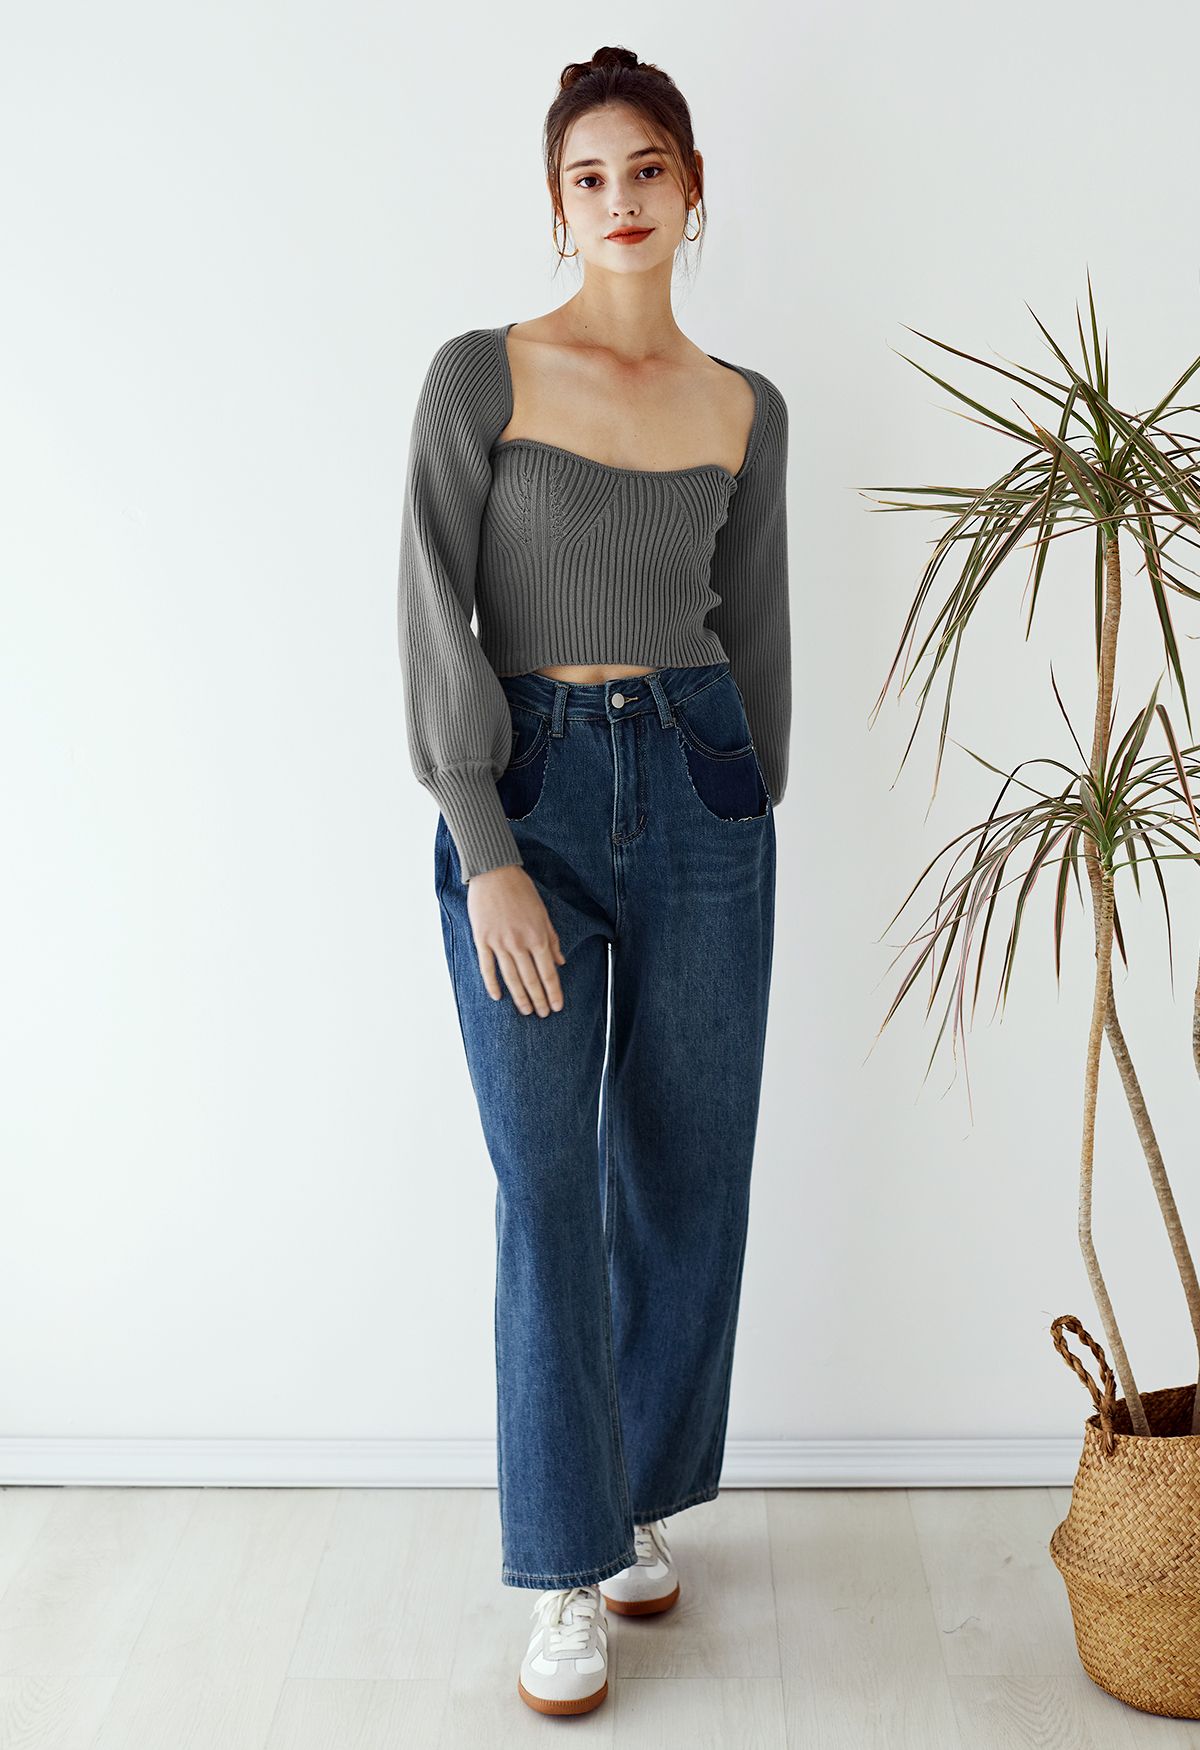 Strapless Knit Top and Sweater Sleeve Set in Sage